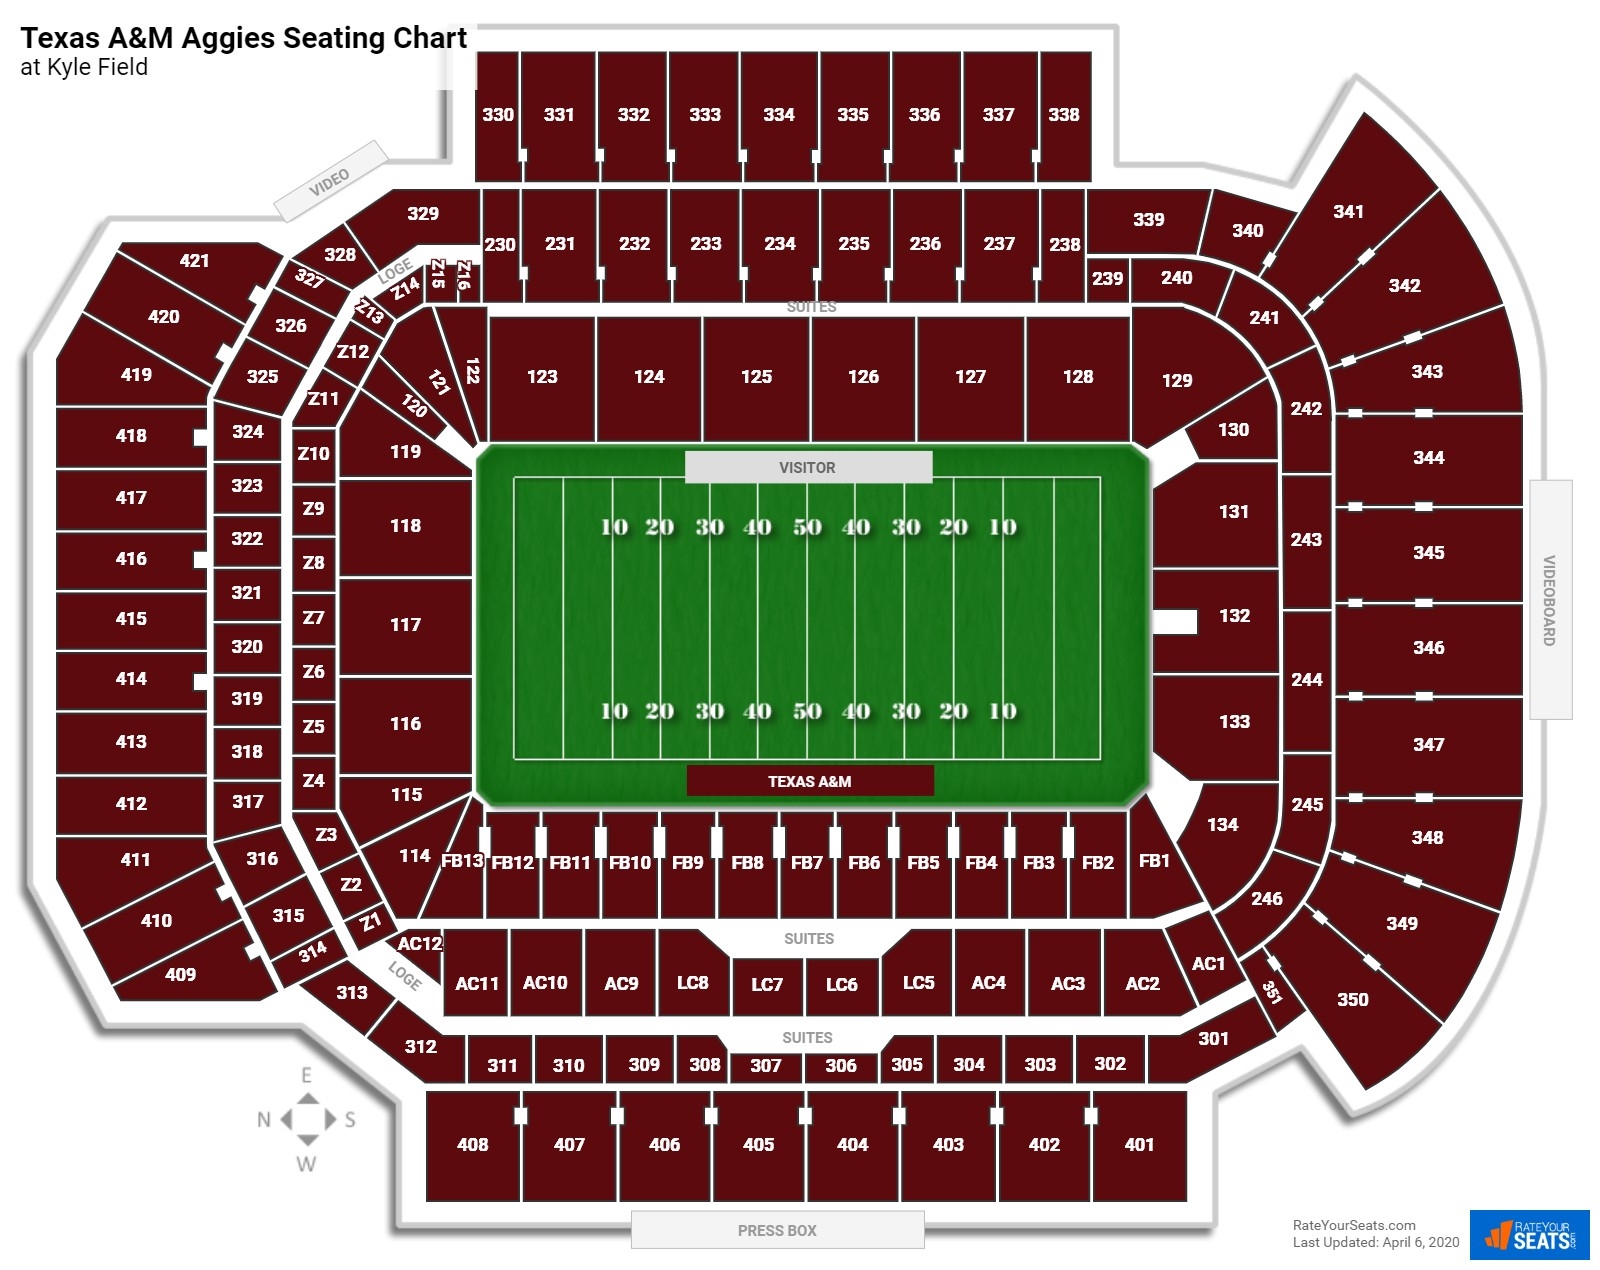 Kyle Field Seating Charts RateYourSeats.com  1 